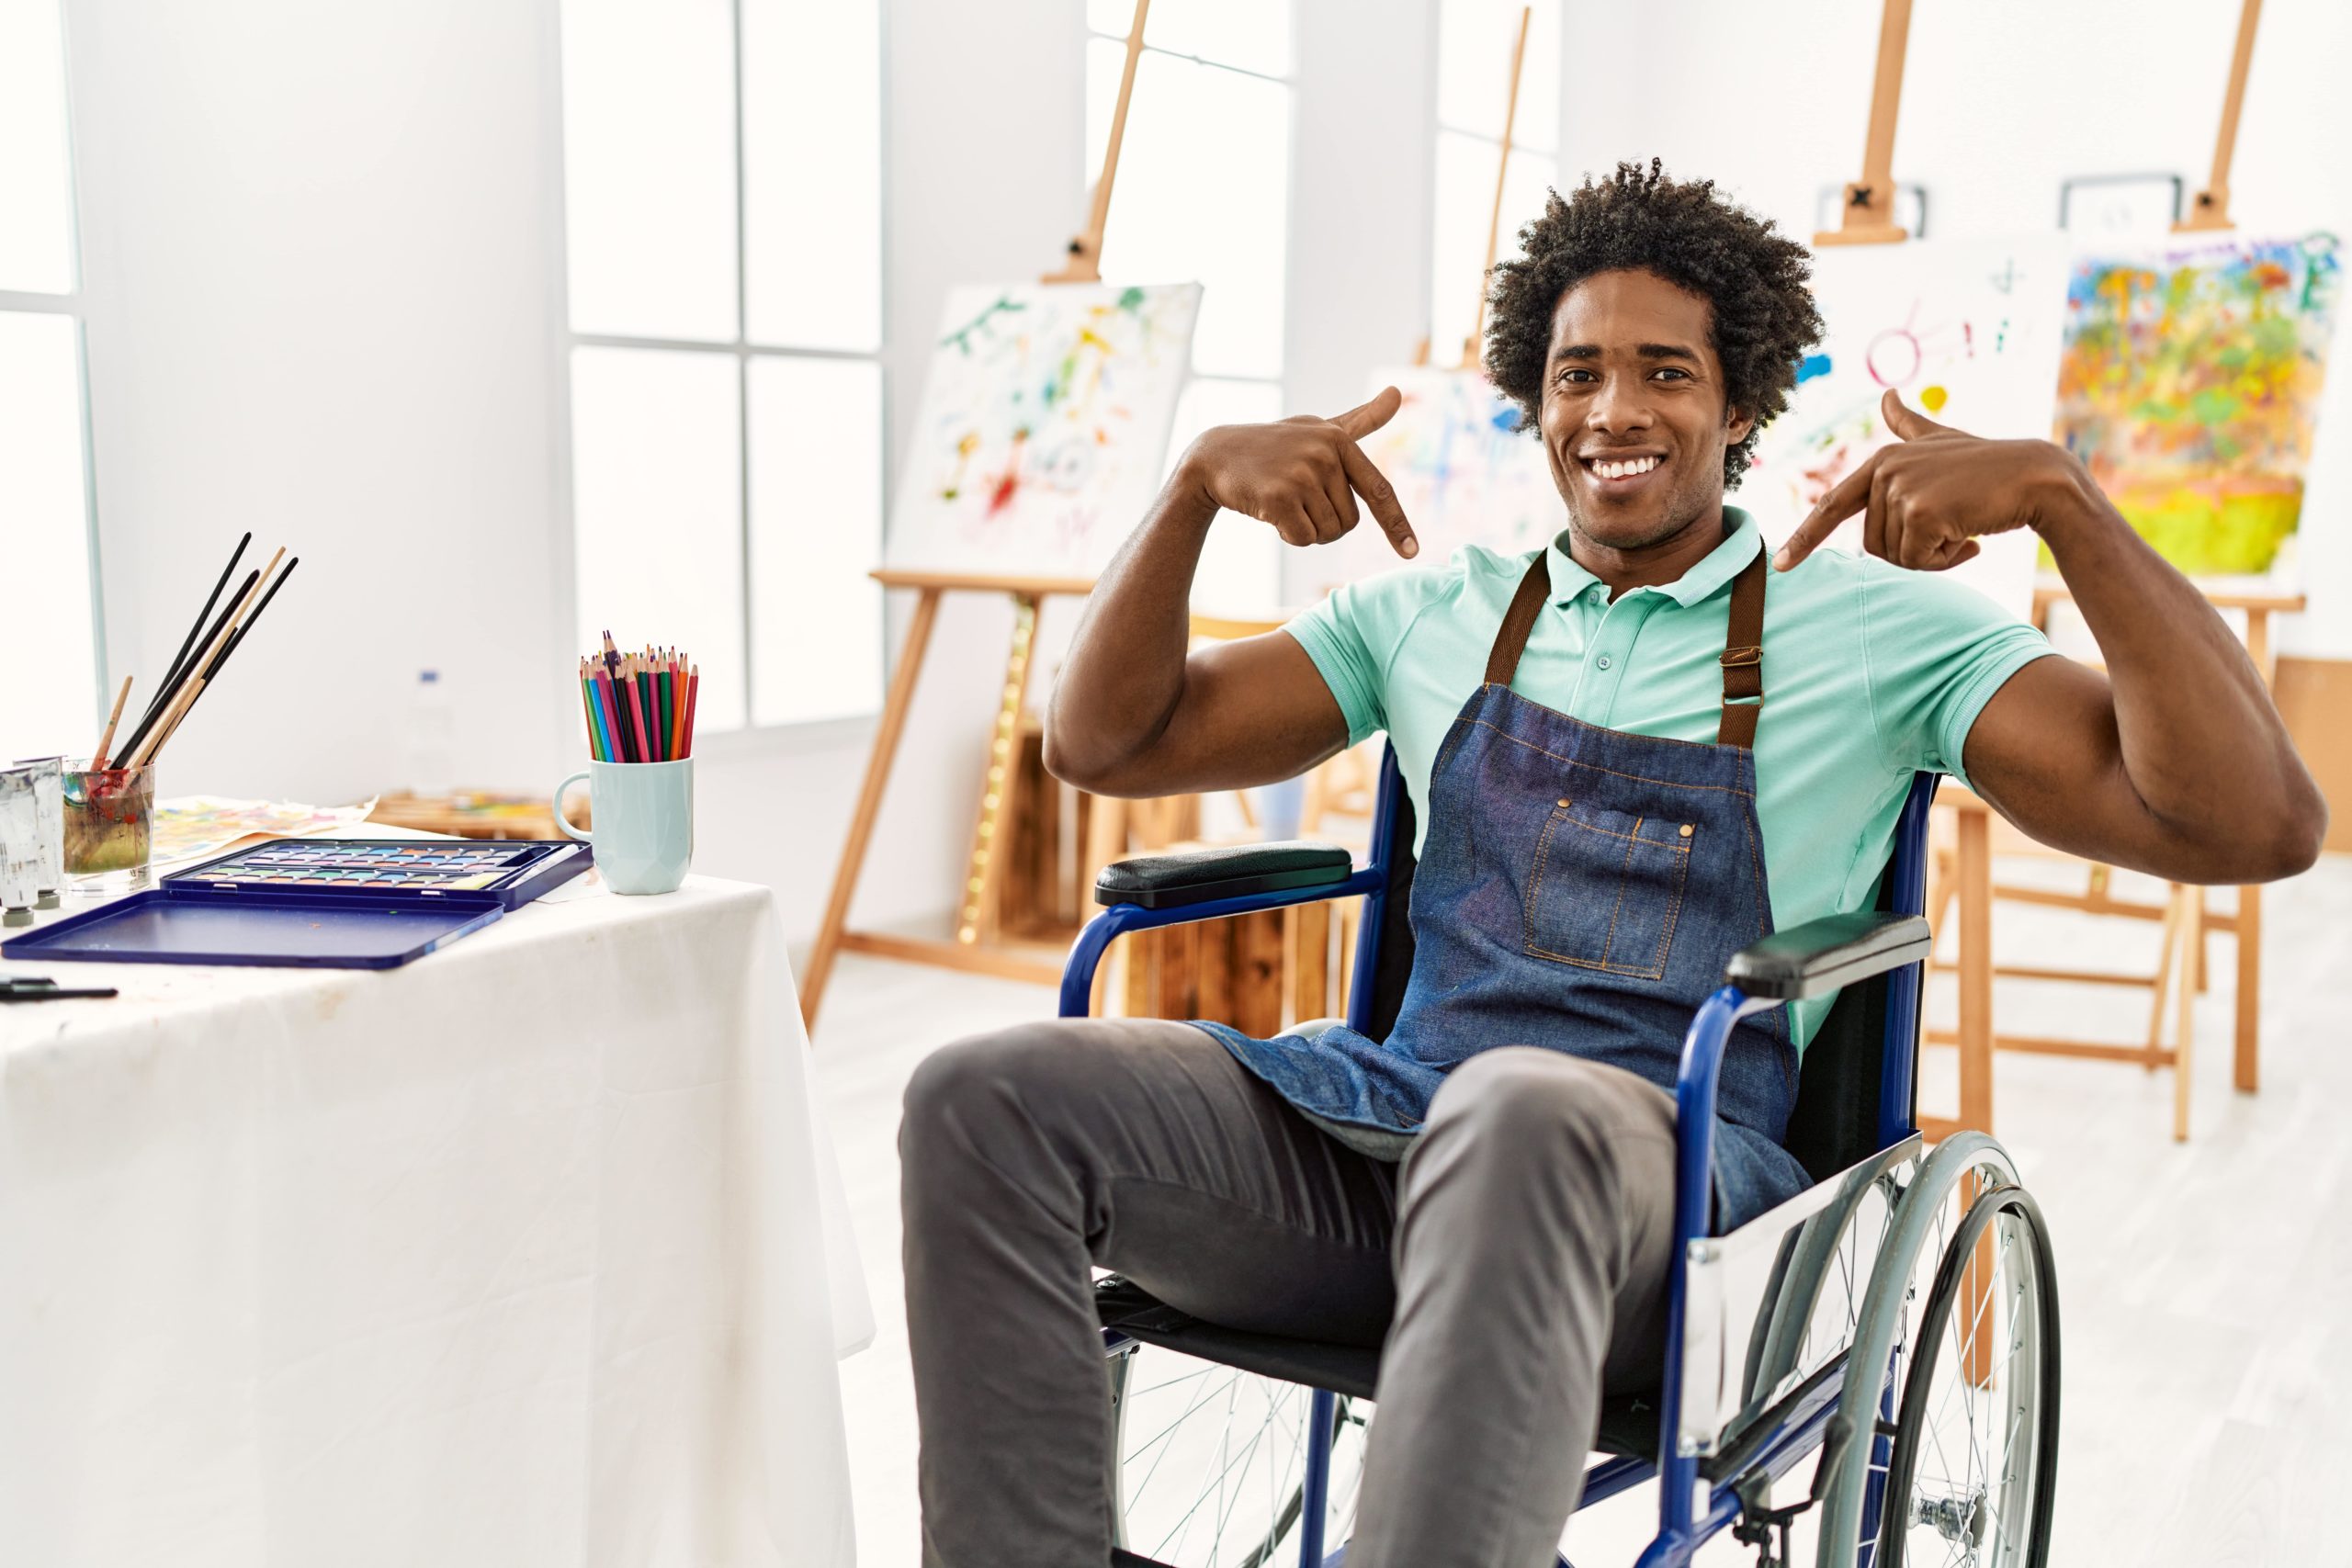 A black person in a wheelchair, they are smiling and pointing both their index fingers at themselves. They are in an artisti studio - their are stands with canvases on in the background